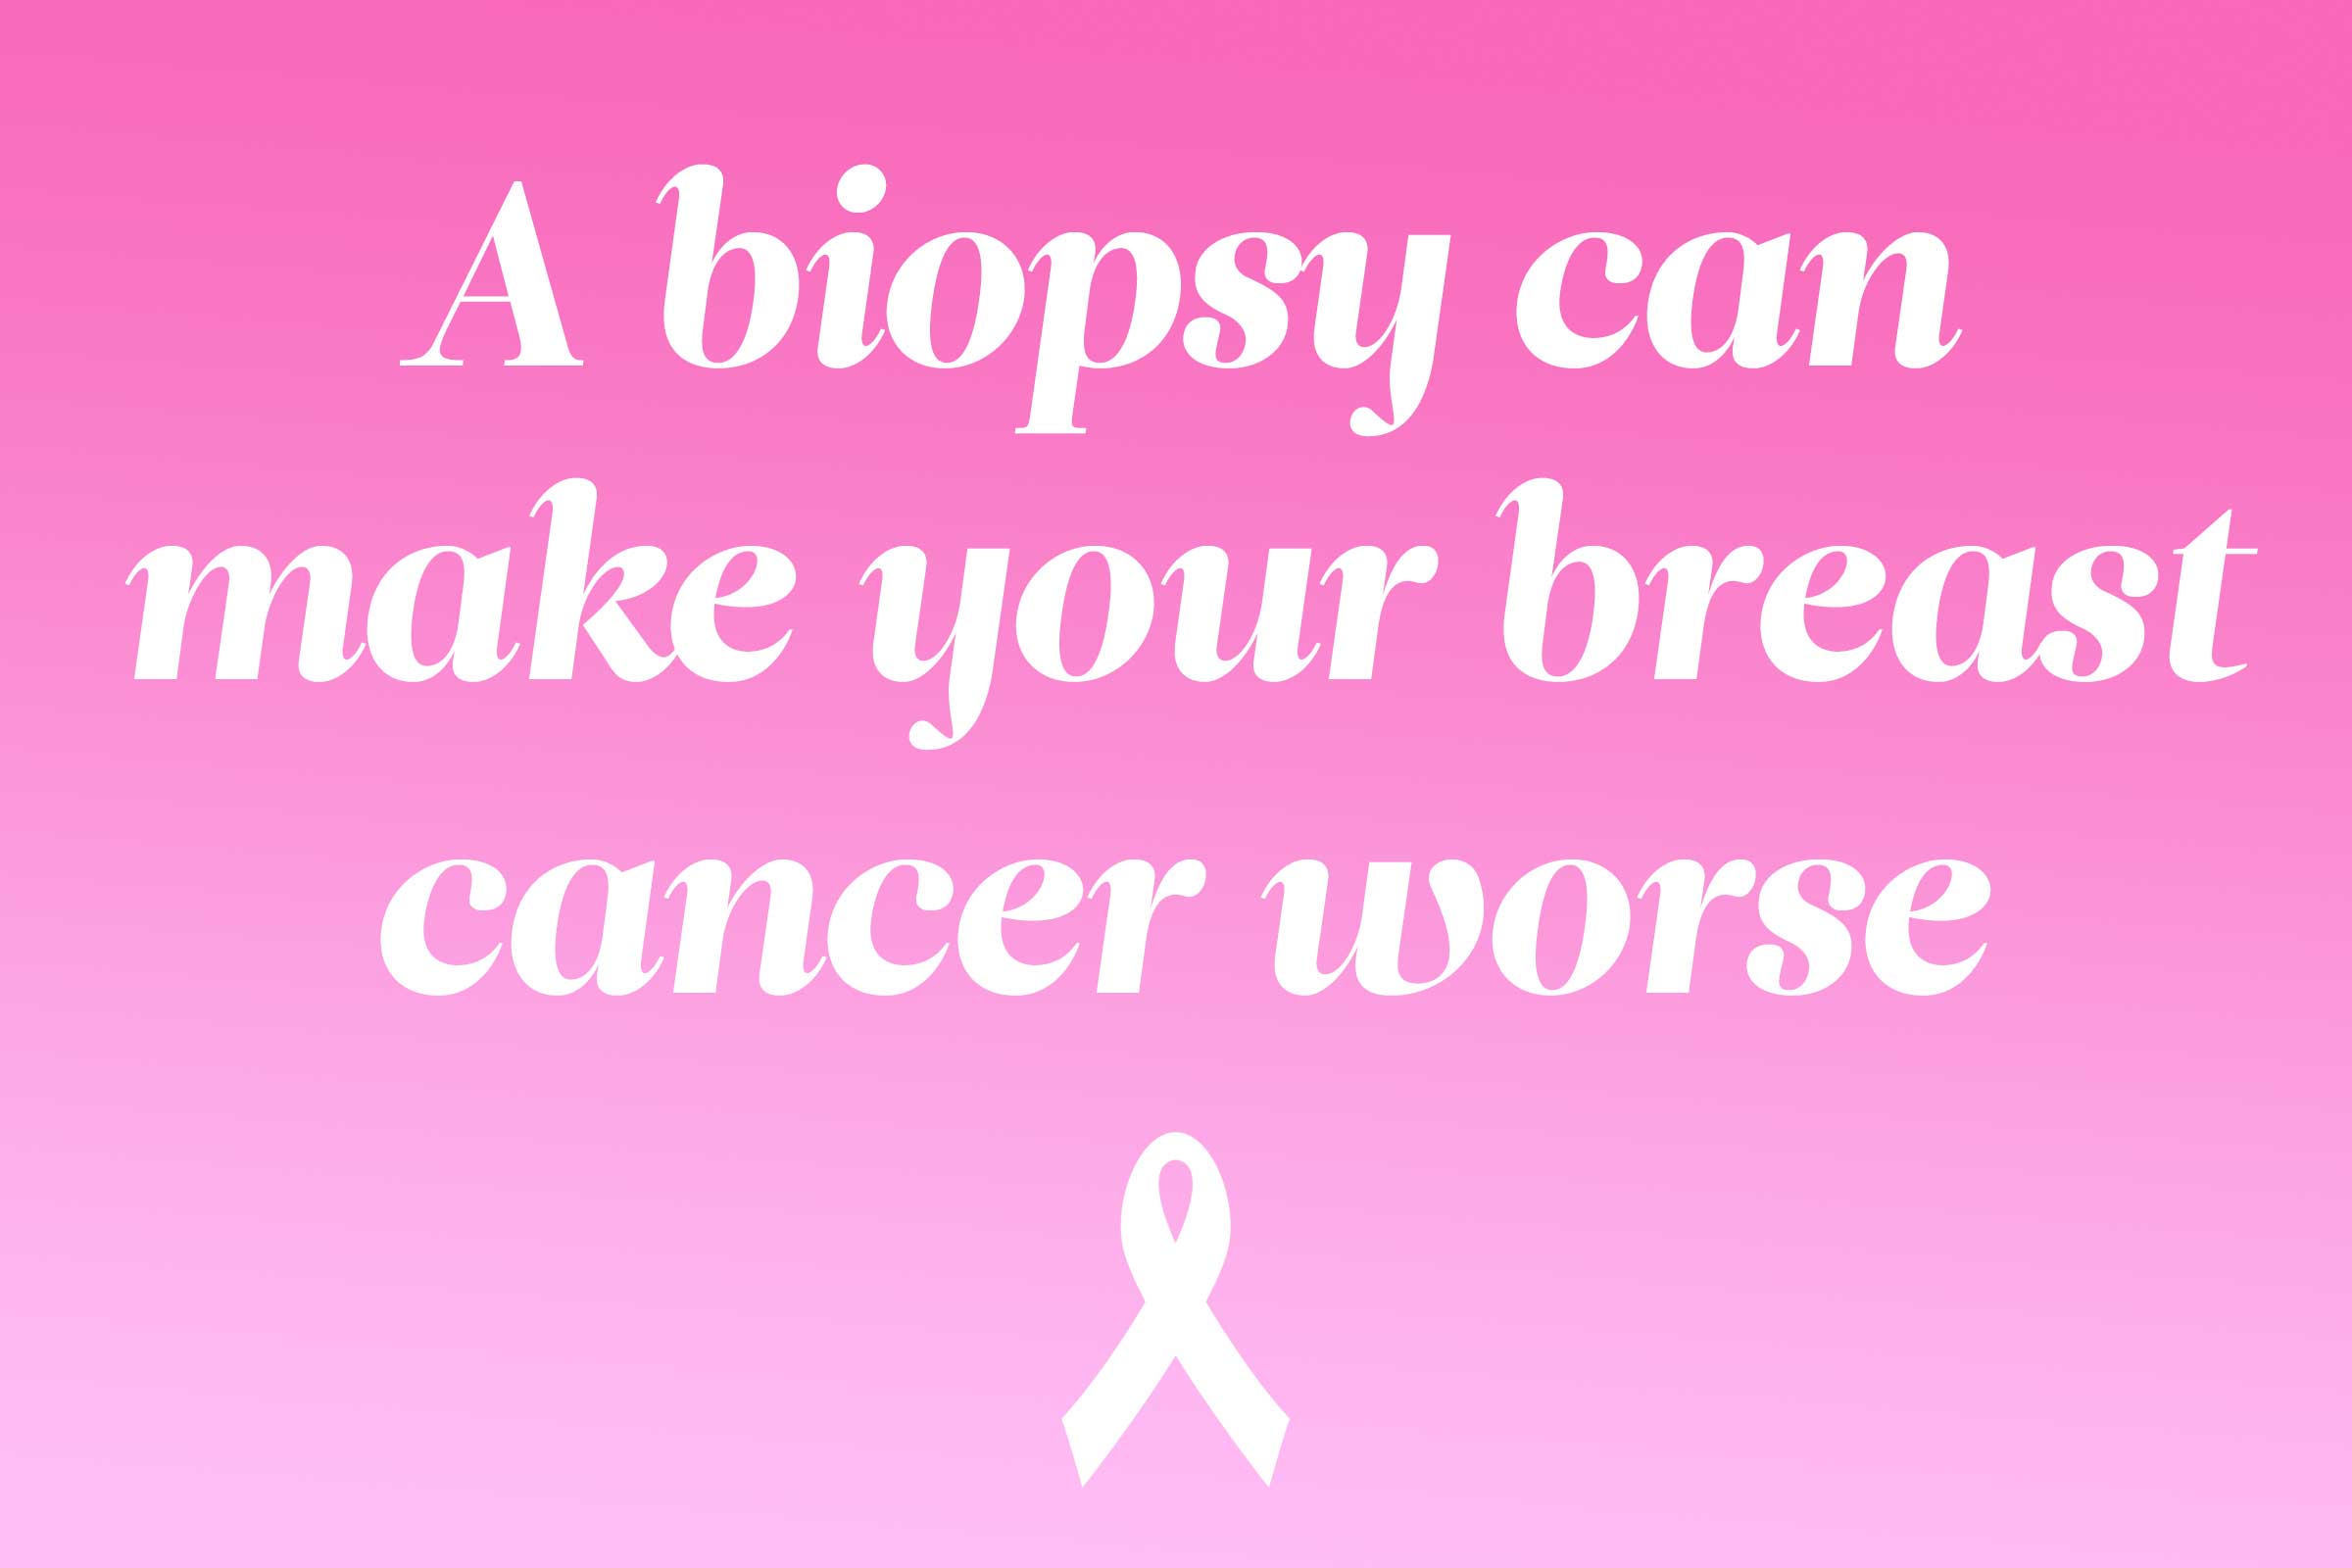 myth: a biopsy can make your breast cancer worse